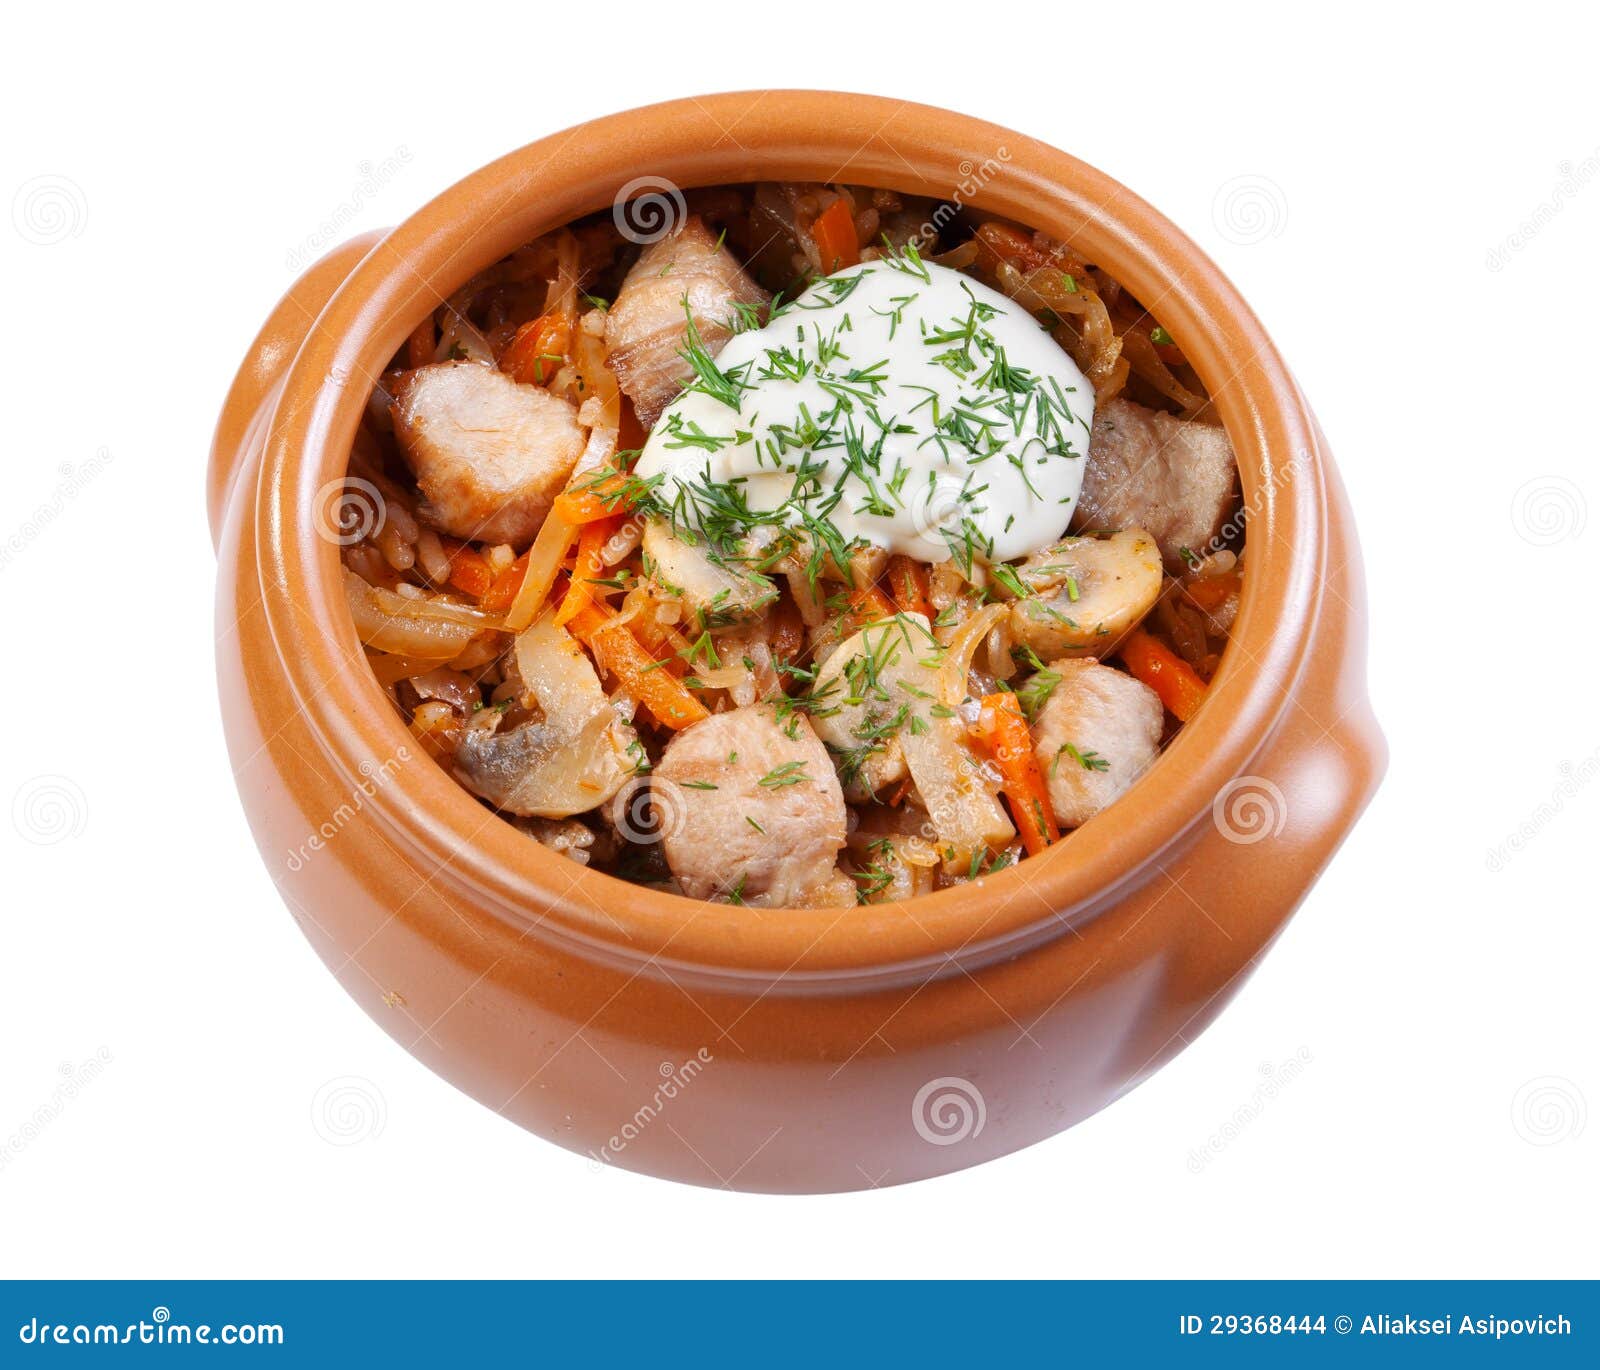 pork with mushrooms, carrots and onions in a ceramic crock pot,